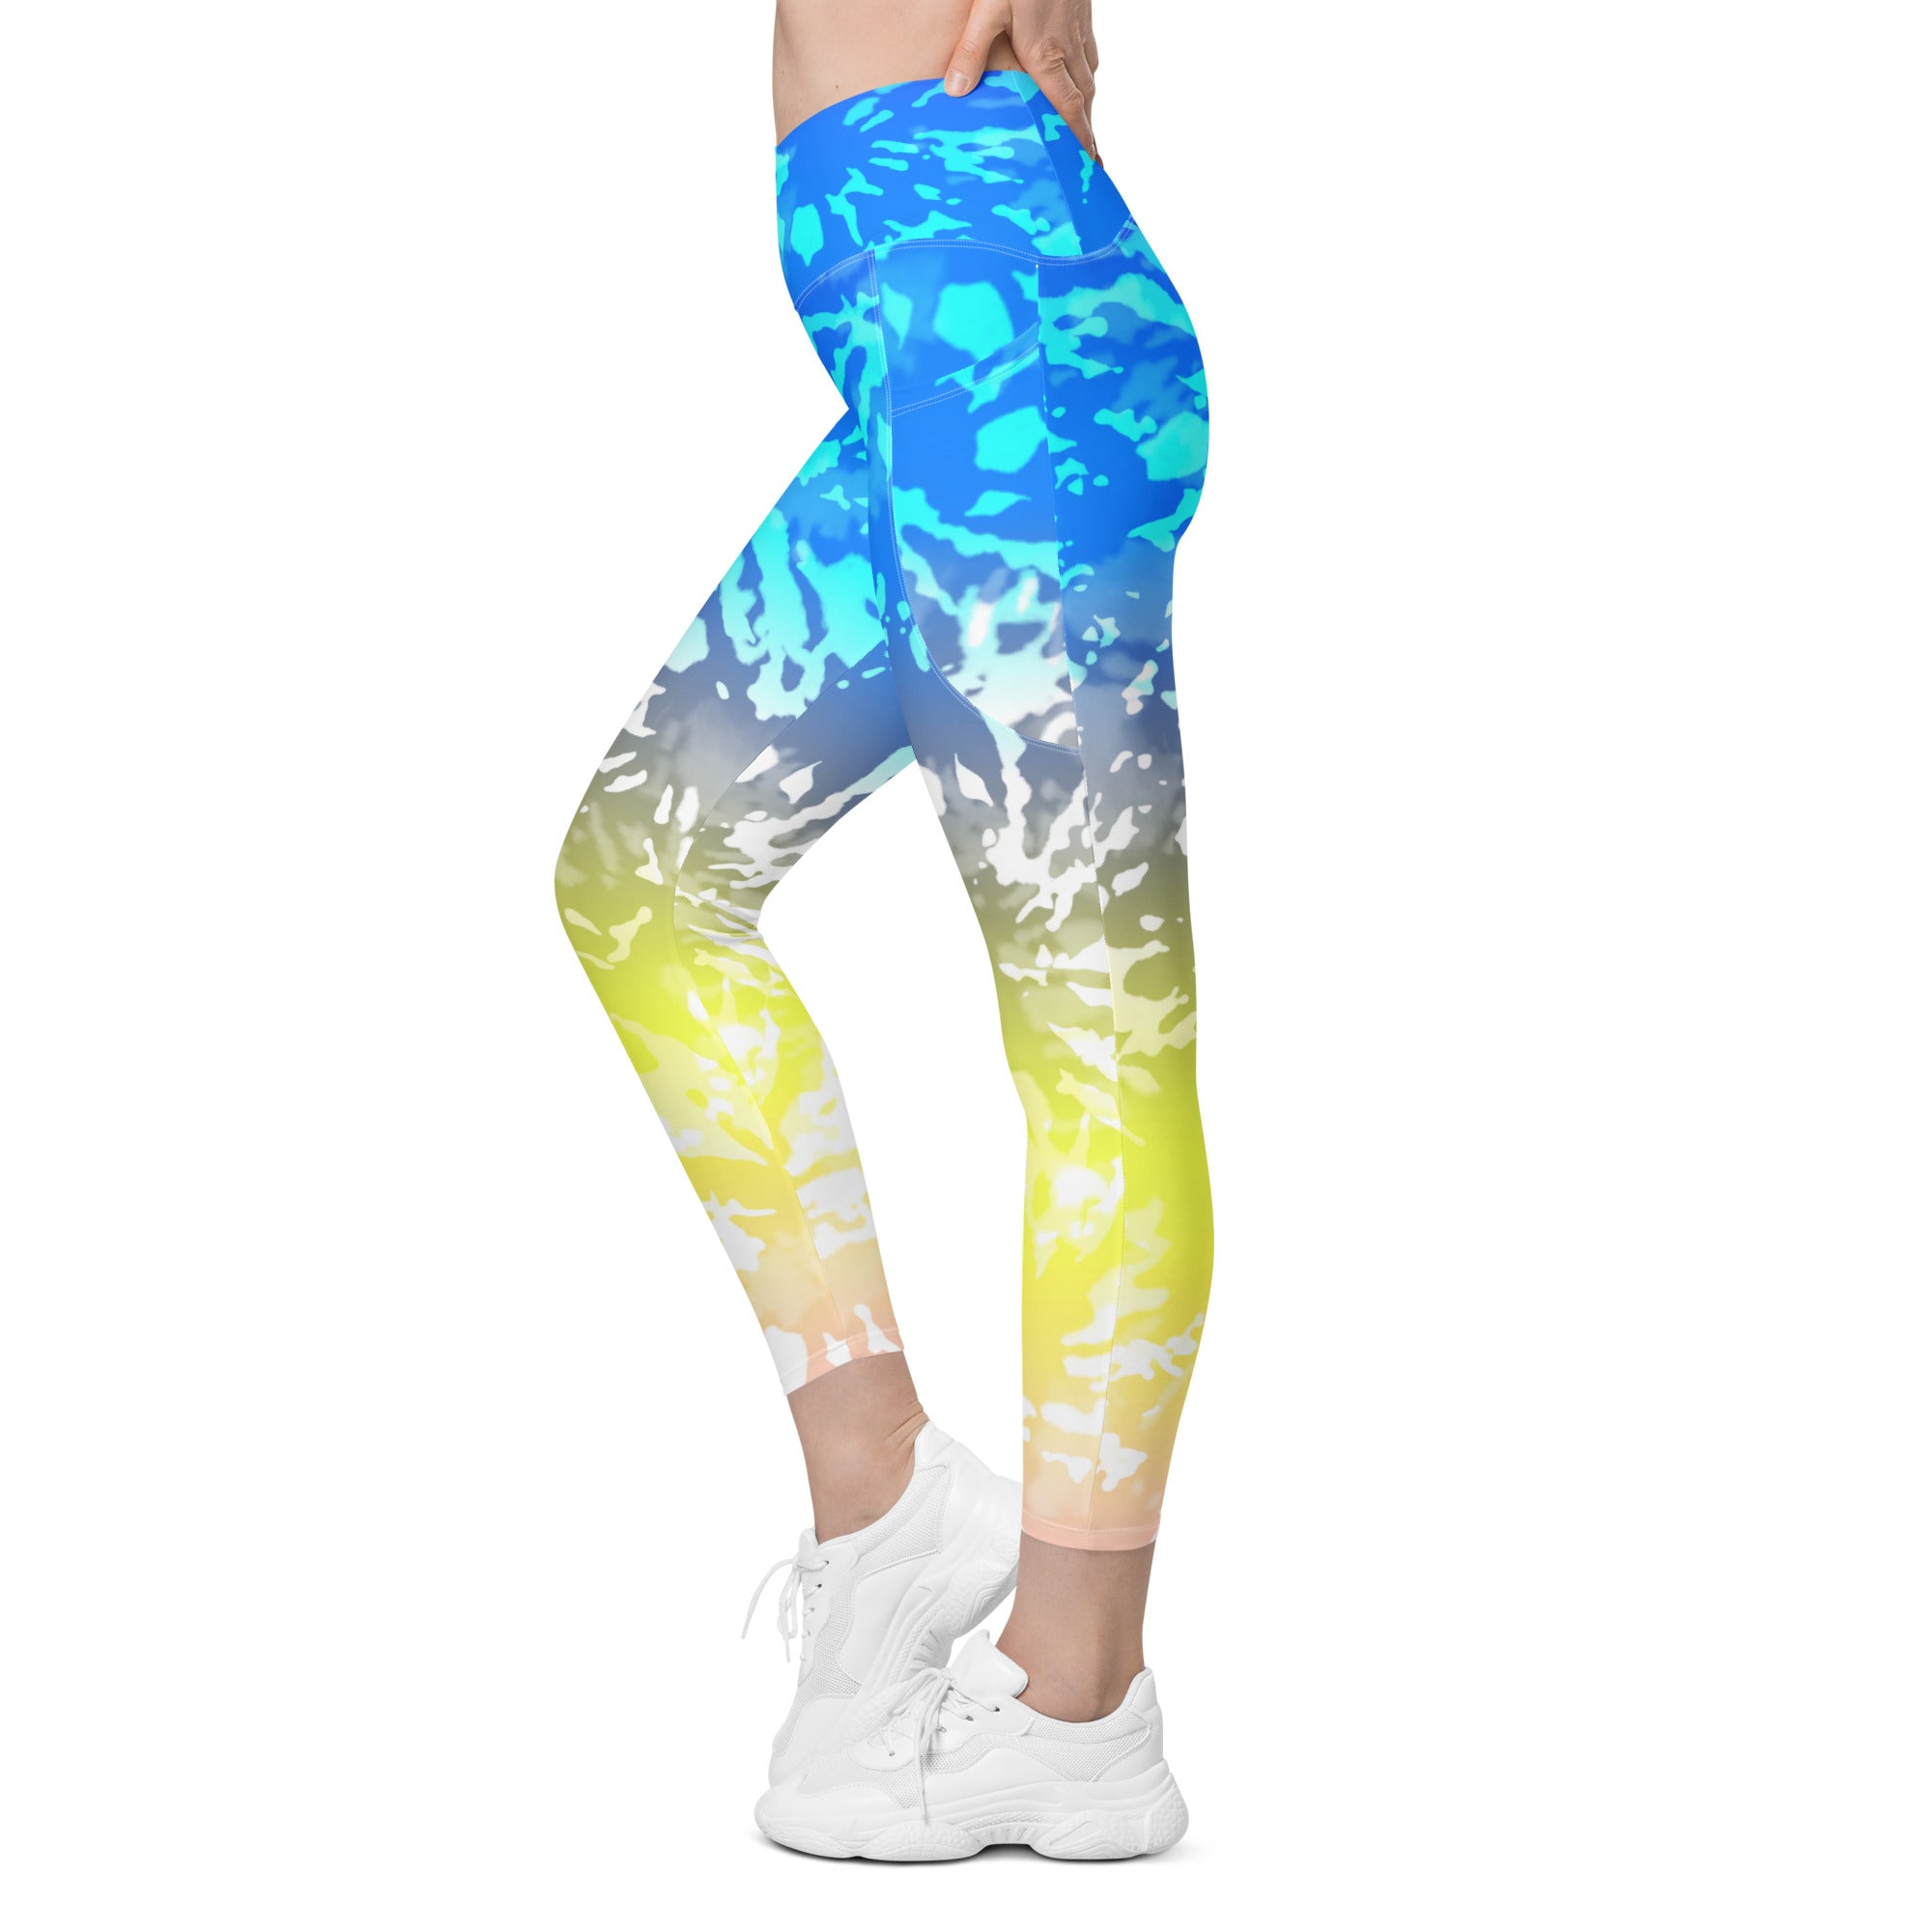 Crossover leggings with pockets- TIE DYE MULTICOLOUR SPLASHES